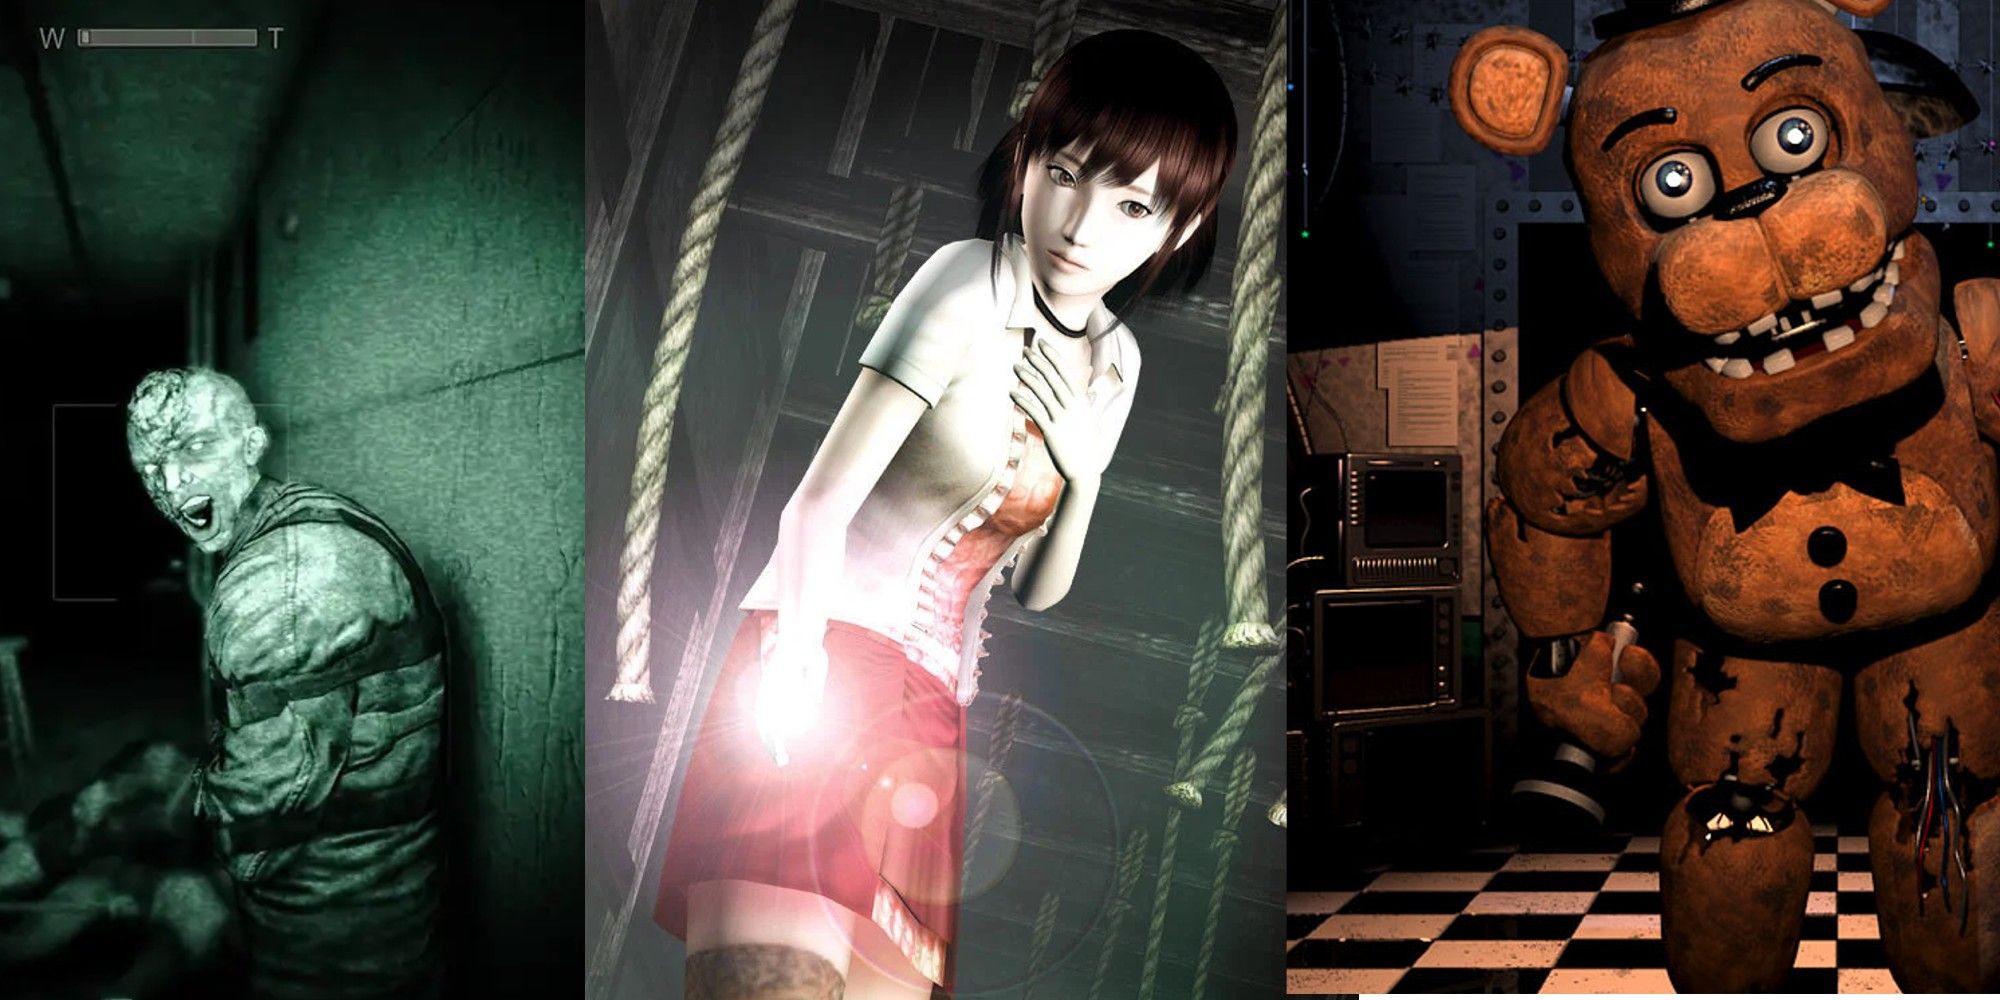 Patient In Outlast, Miku In Fatal Frame, Freddy In Five Nights At Freddys